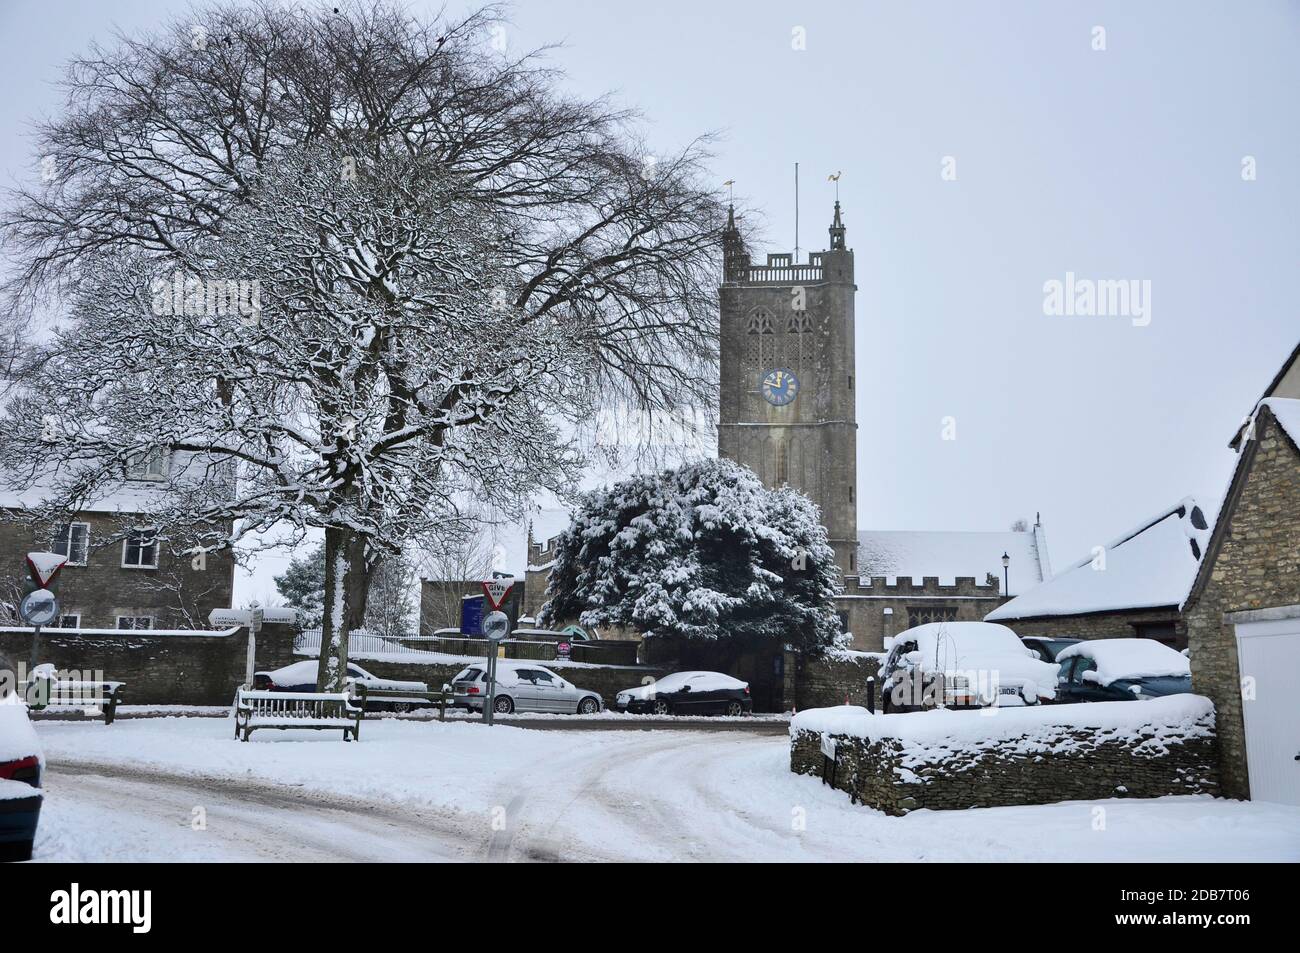 A snowy scene at Sherston in Wiltshire. The Church of the Holy Cross with vehicles and trees covered in snow.UK Stock Photo